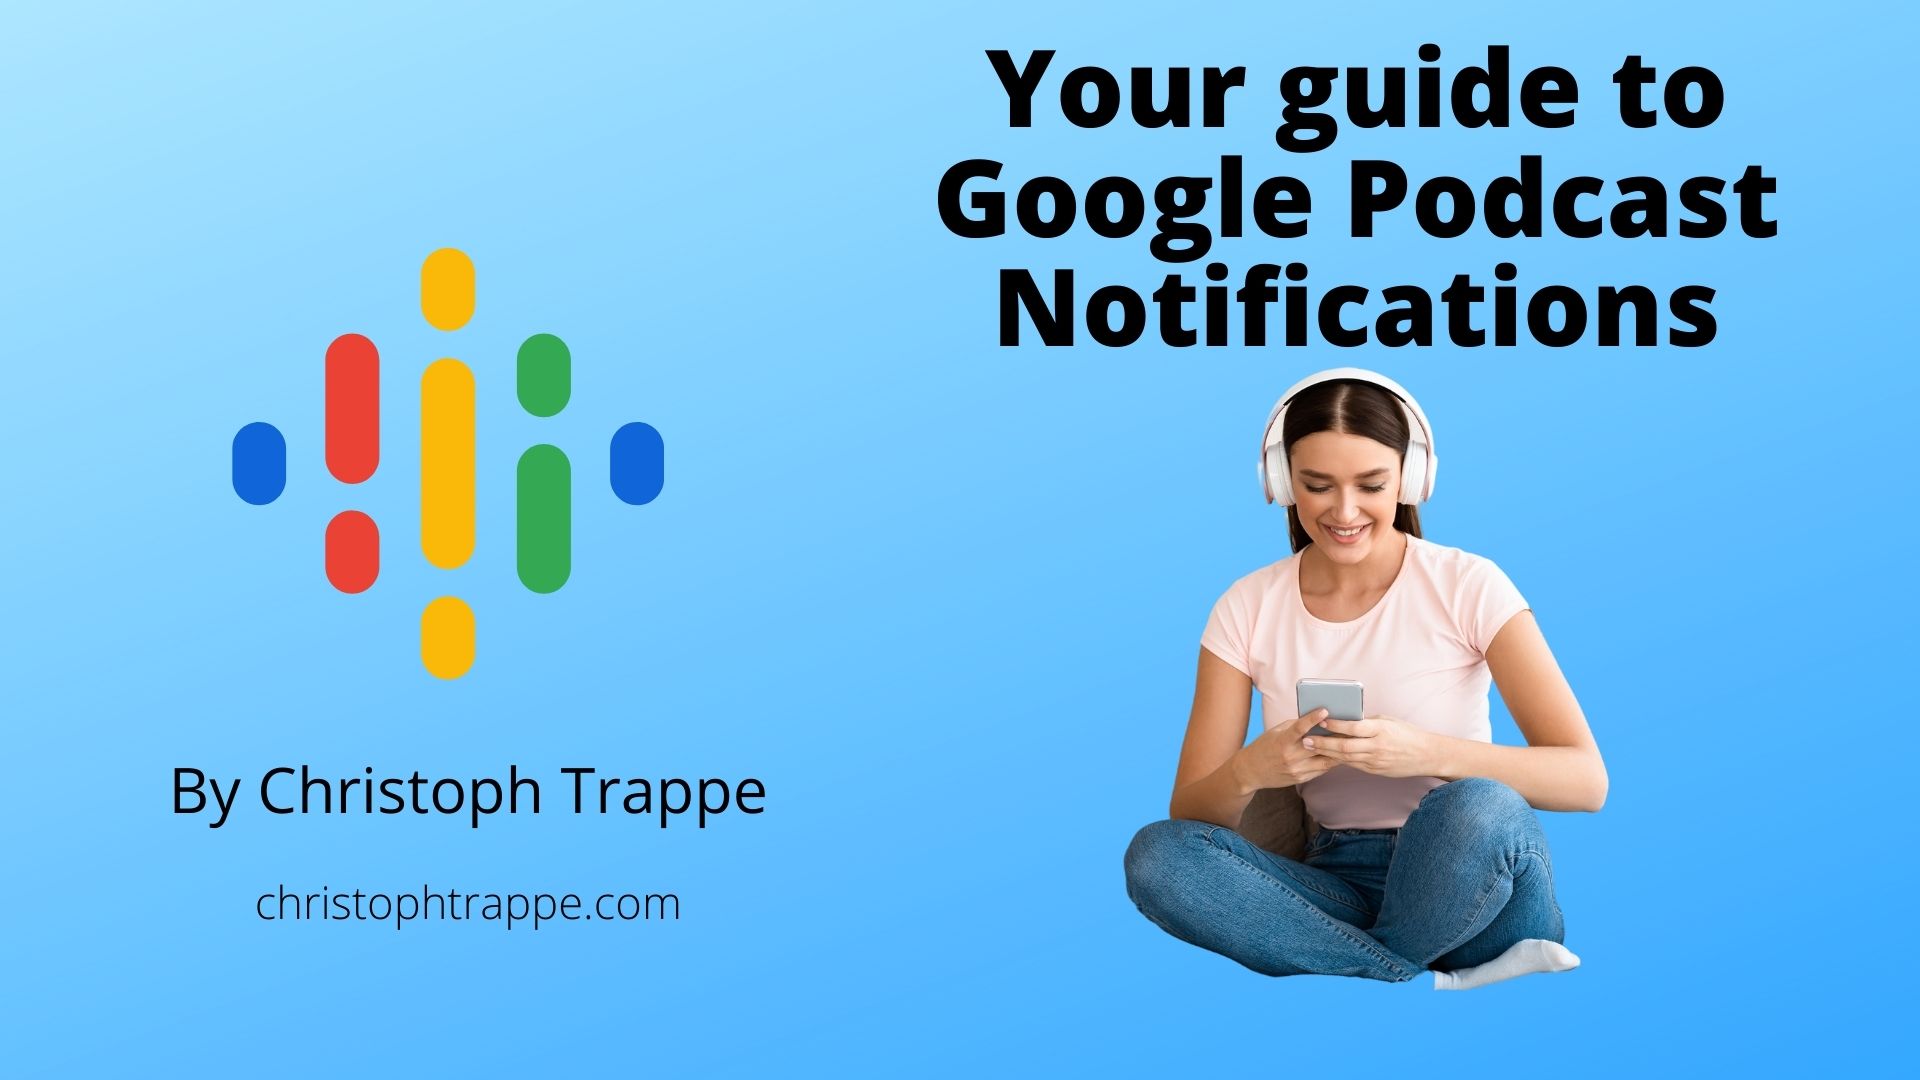 Your guide to Google Podcast Notifications